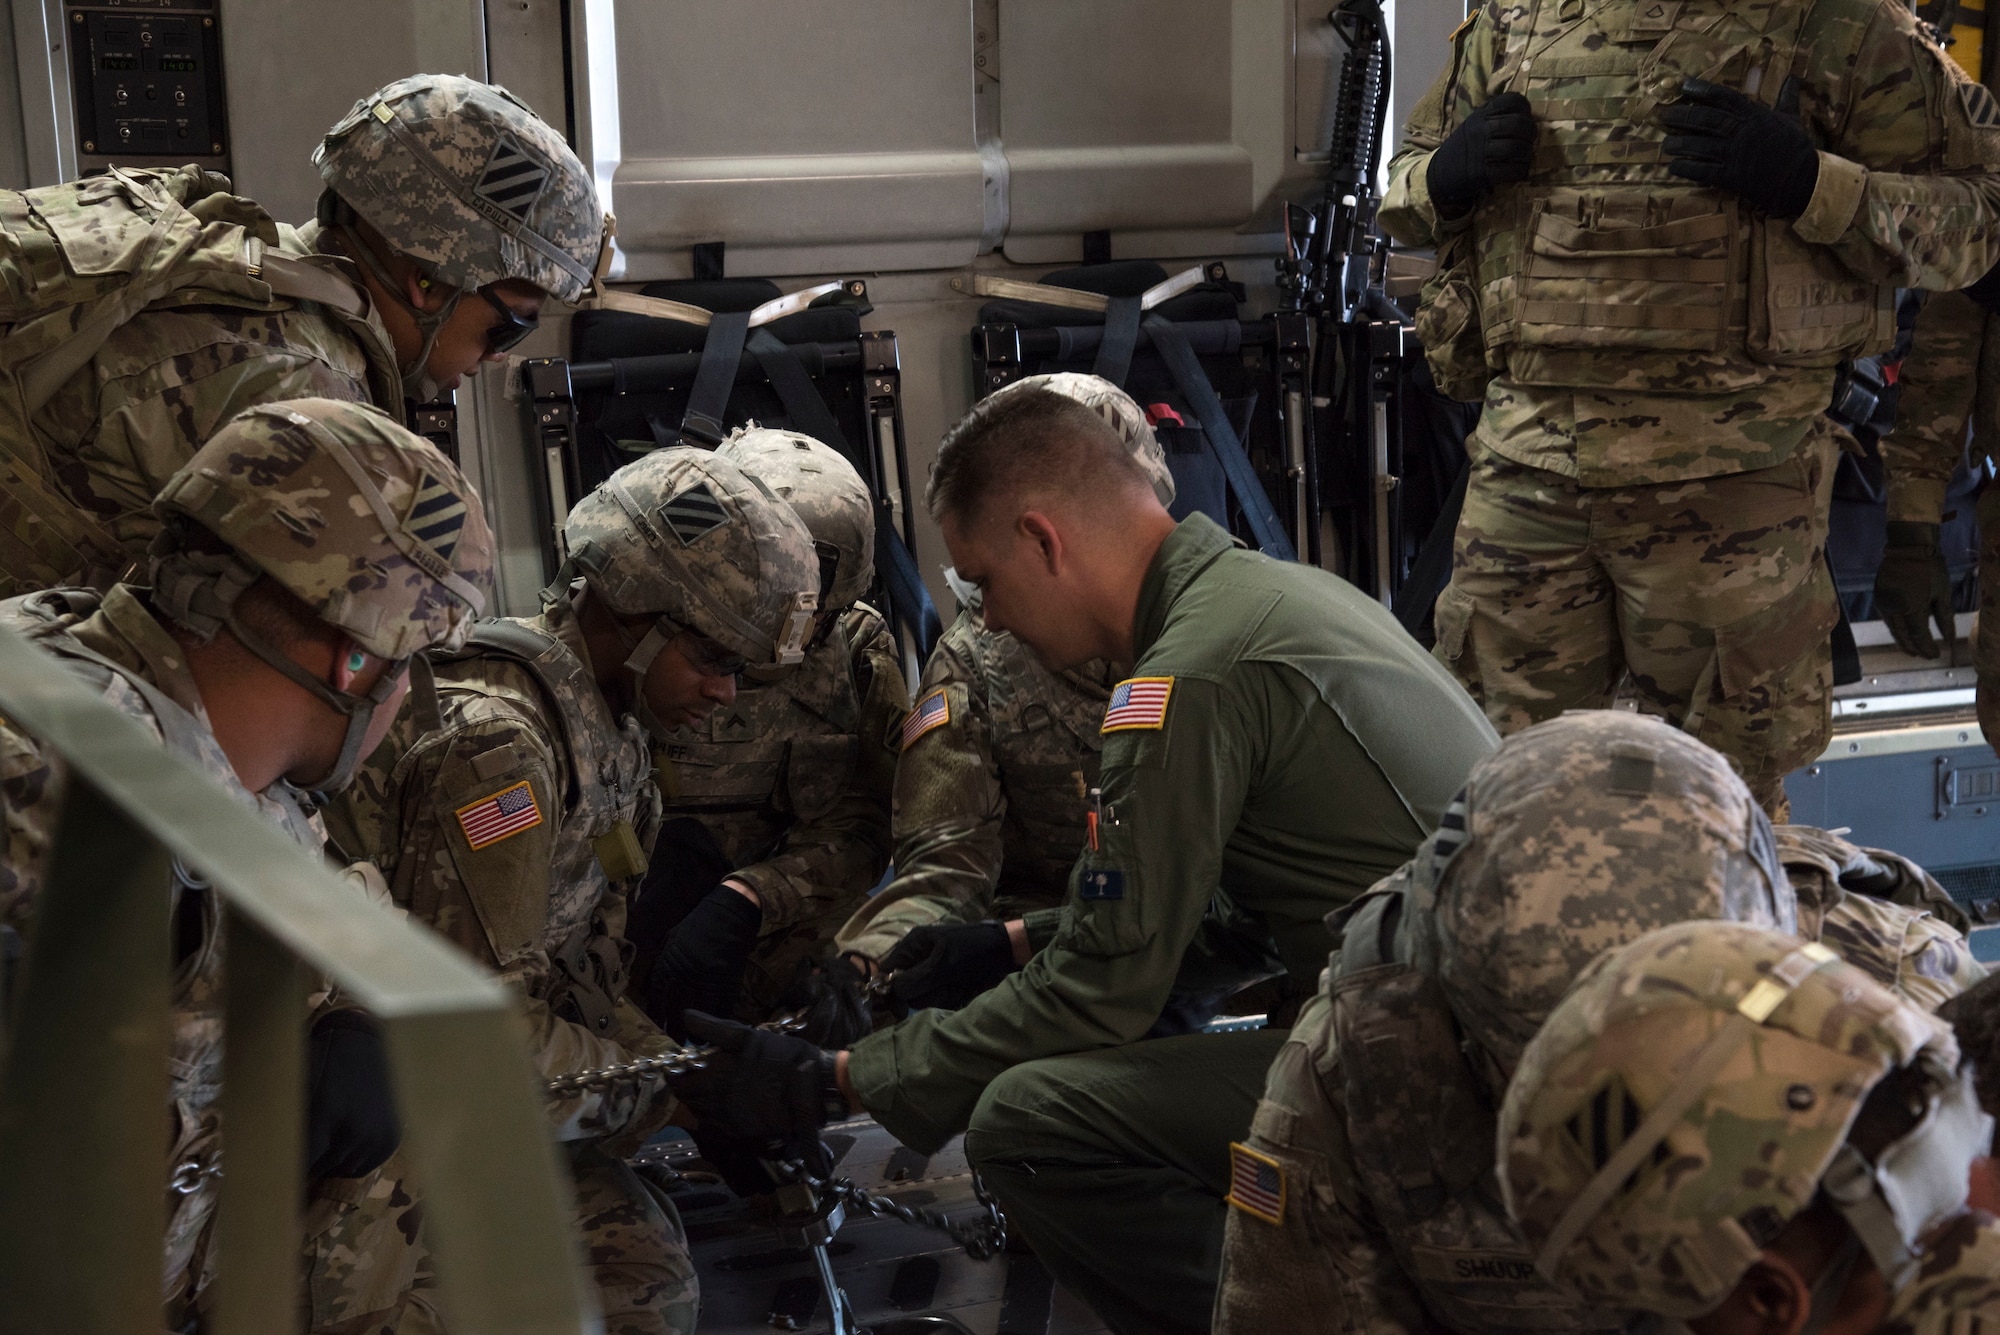 U. S. Air Force Senior Airman Branden Burkhart, loadmaster with the 300th Airlift Squadron Joint Base Charleston, S.C., teaches soldiers with the 414th Signal Company from Fort Stewart, Georgia how to secure equipment on a C-17 Globemaster III May 14, 2019, at Wright Army Airfield. The soldiers trained to be ready during an Expeditionary Deployment Readiness Exercise.(U.S. Air Force photo by Senior Airman William Brugge)